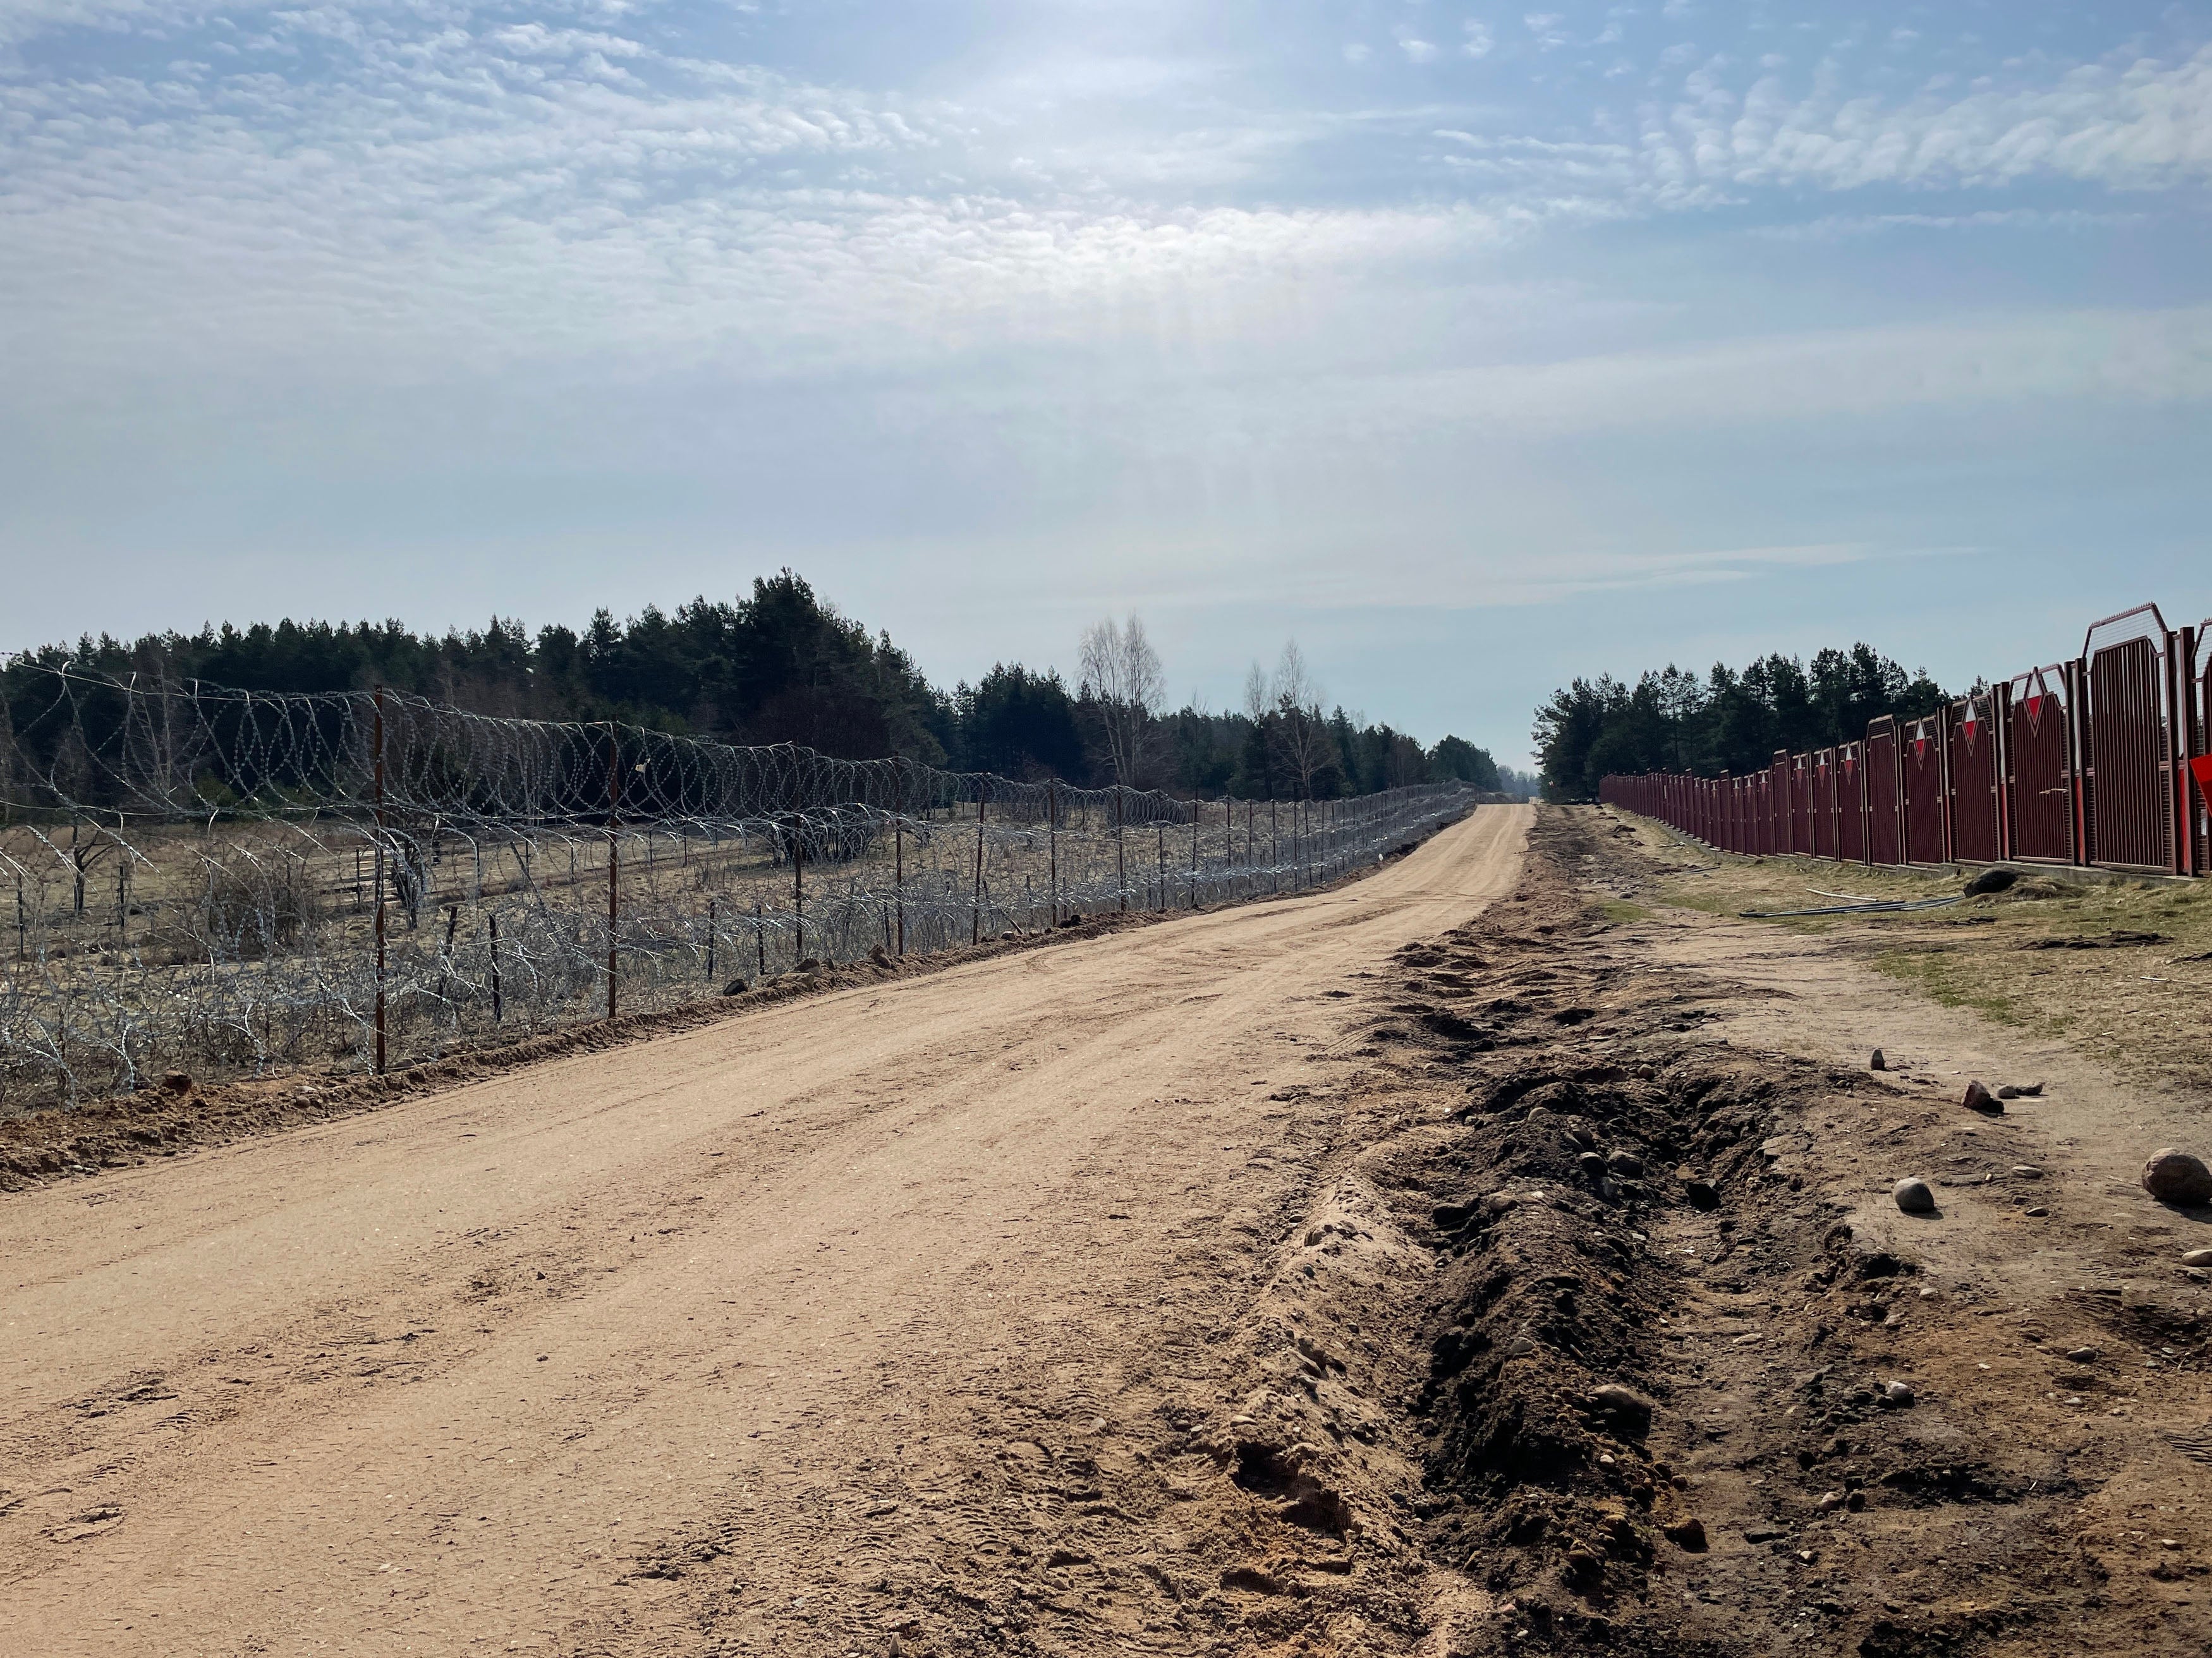 Polish security officials strung razor wire to stop immigrants crossing from Belarus and are now working on a more permanent steel wall